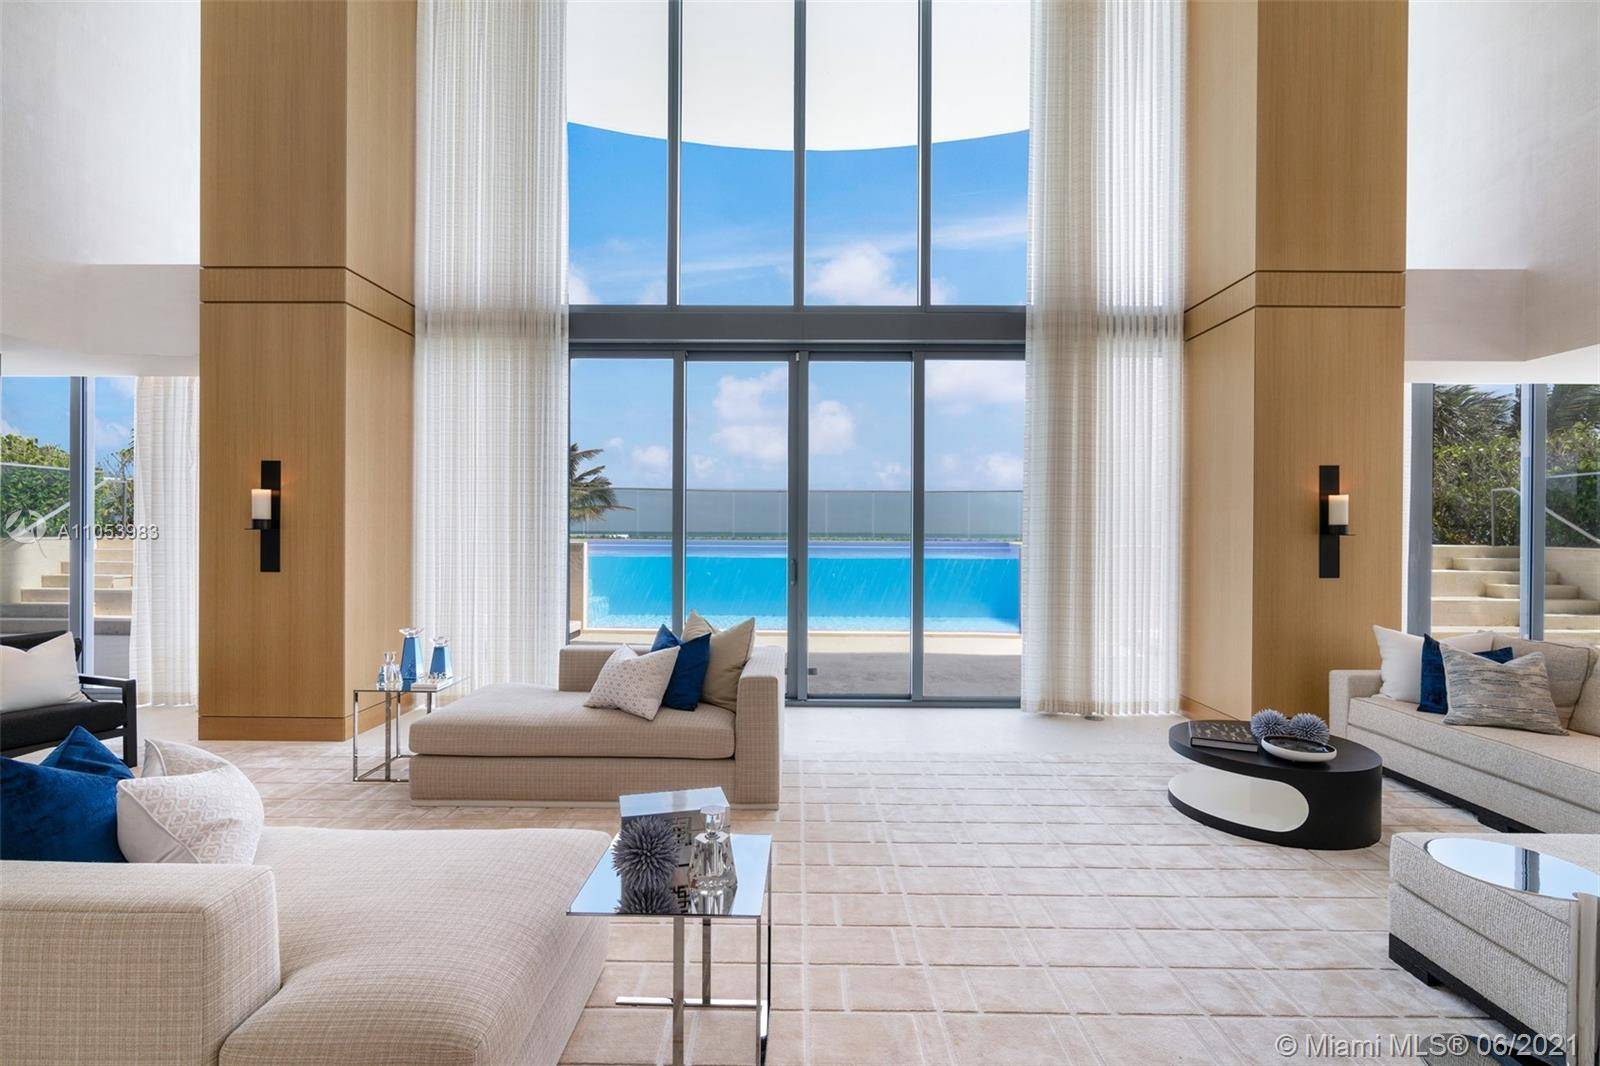 The Beach House at Regalia Sunny Isles is an oceanfront residence at the scale of a private home, with all the conveniences of an ultra luxury condominium.